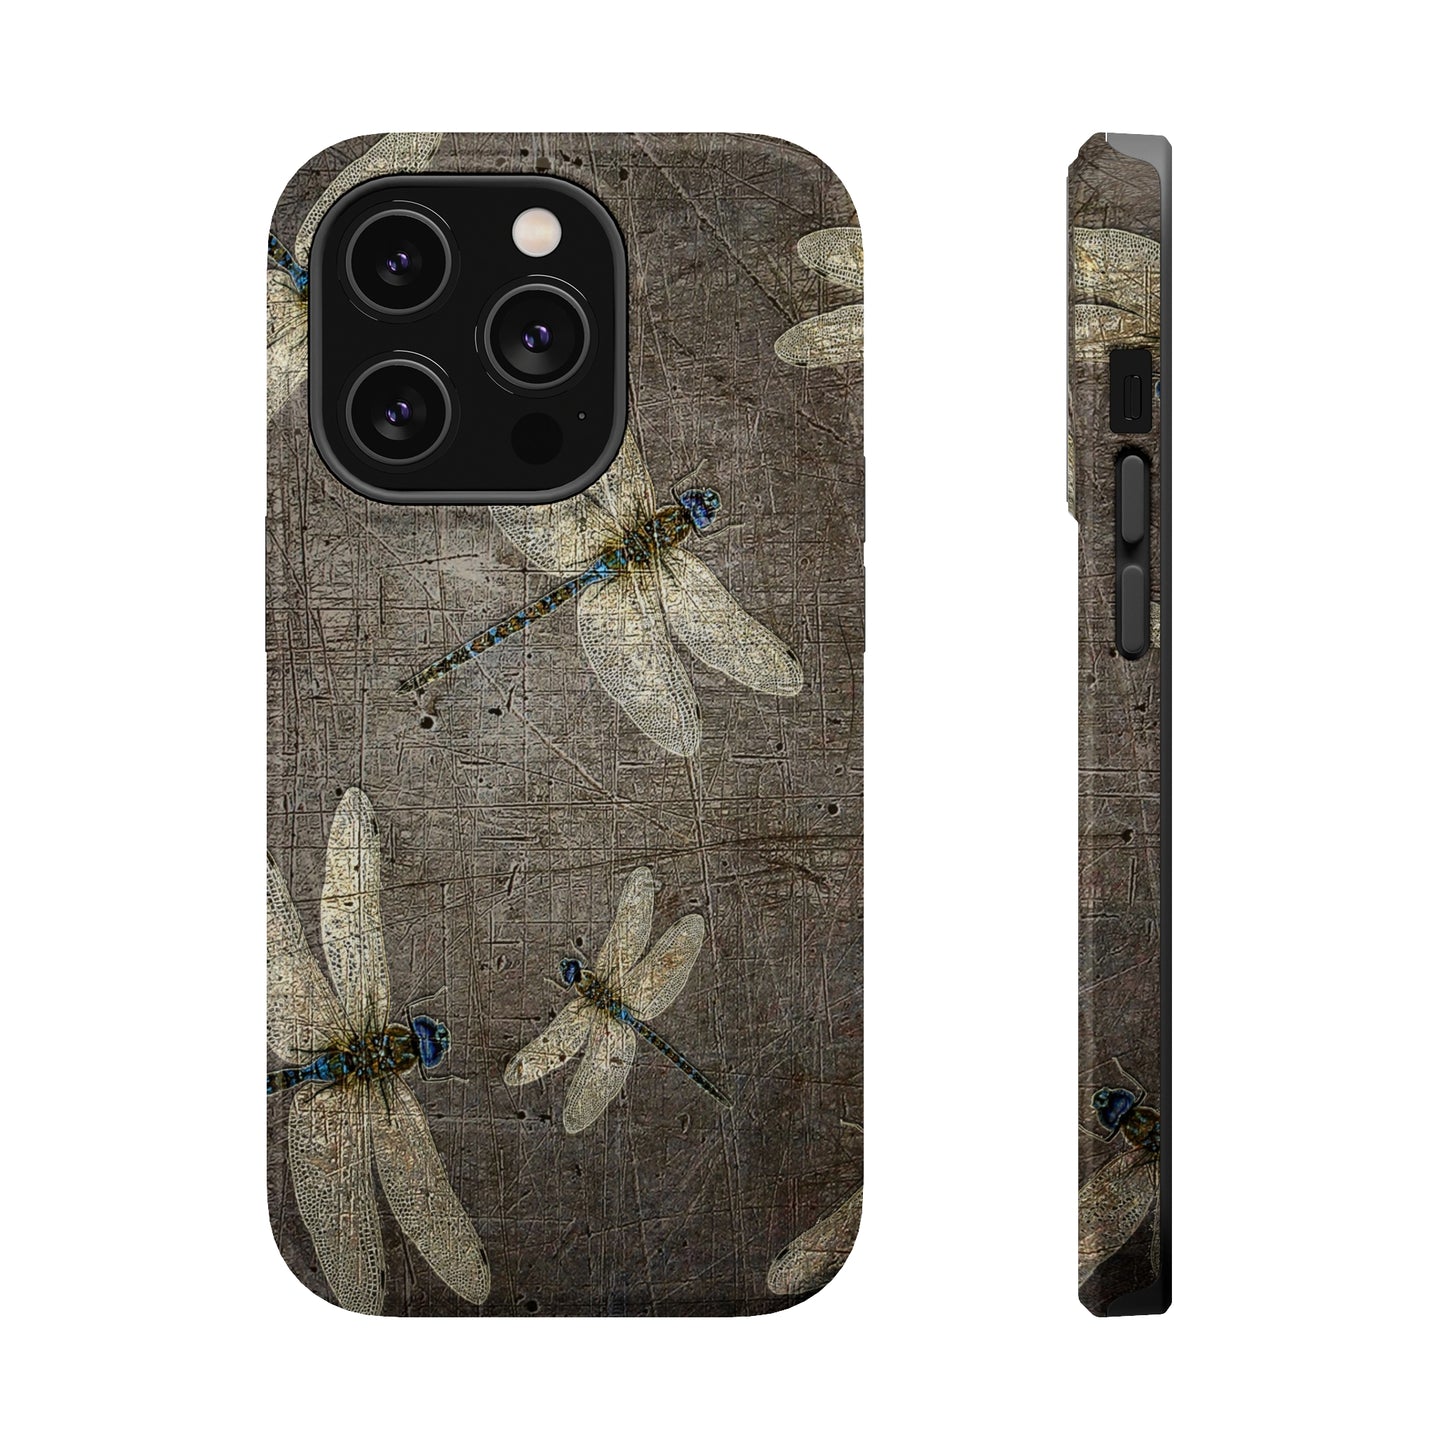 Dragonfly Themed Mag Safe Tough Cases for iPhones 13 and 14 - Flight of Dragonflies on Stone Background Print